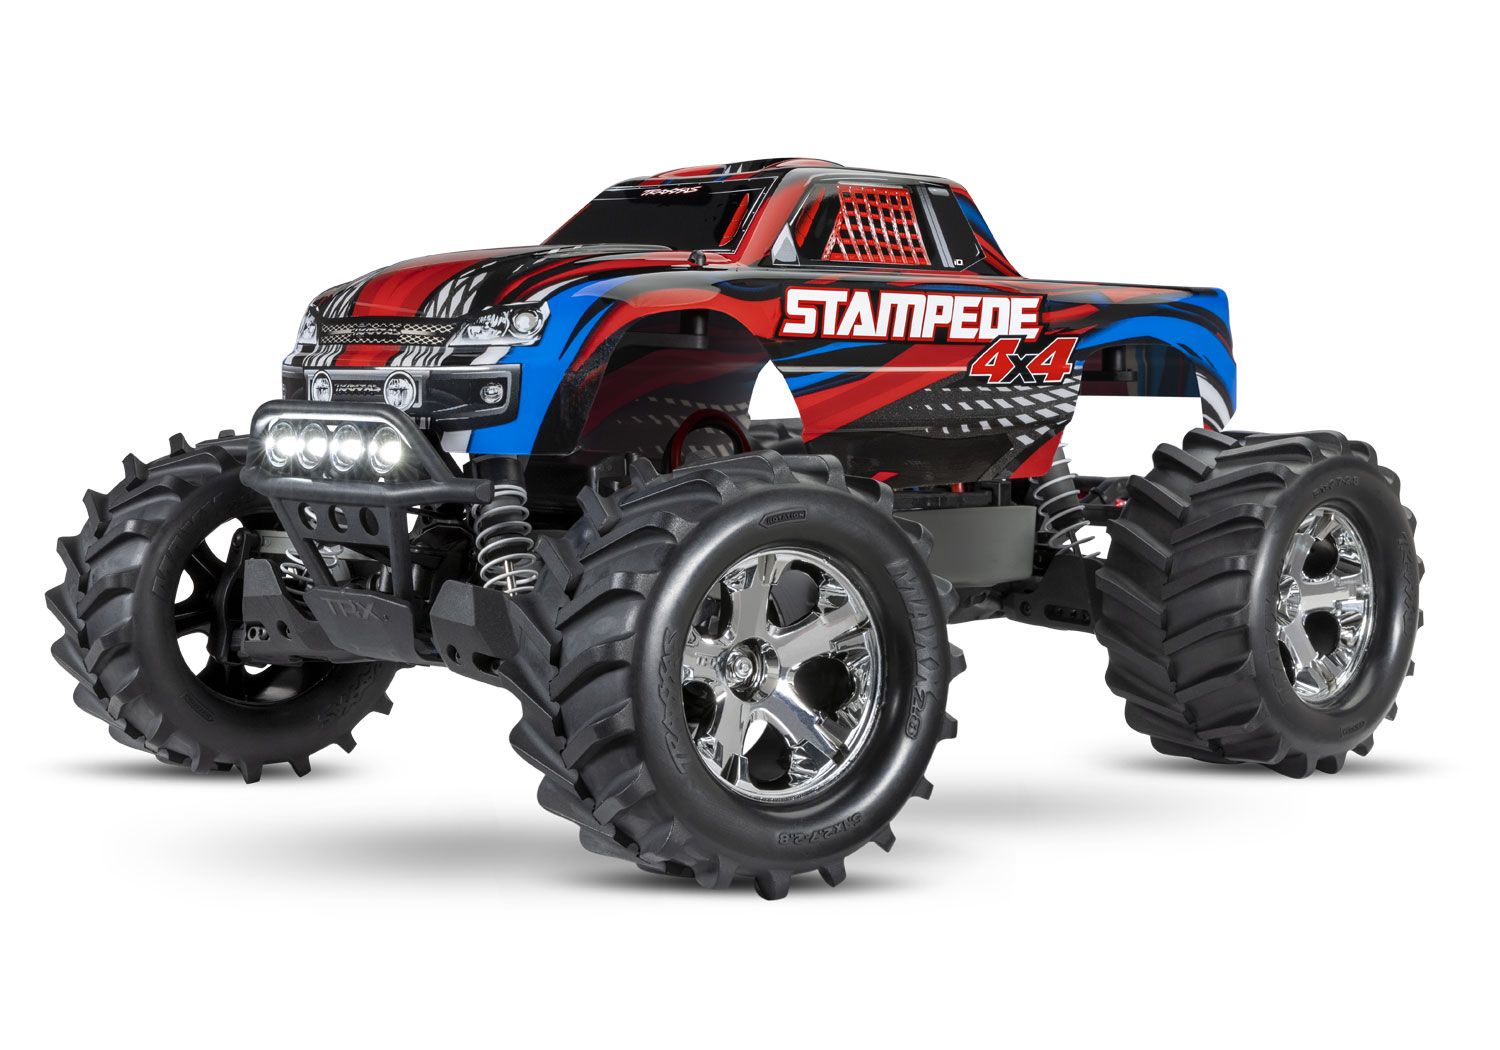 TRAXXAS 67054-61 Stampede 4X4 1/10 4WD monster truck RTR, with TQ 2.4GHz radio, XL-5 ESC, 8.4V NiMH 3000mAh battery, 4-amp DC Fast Charger, LED lighting.